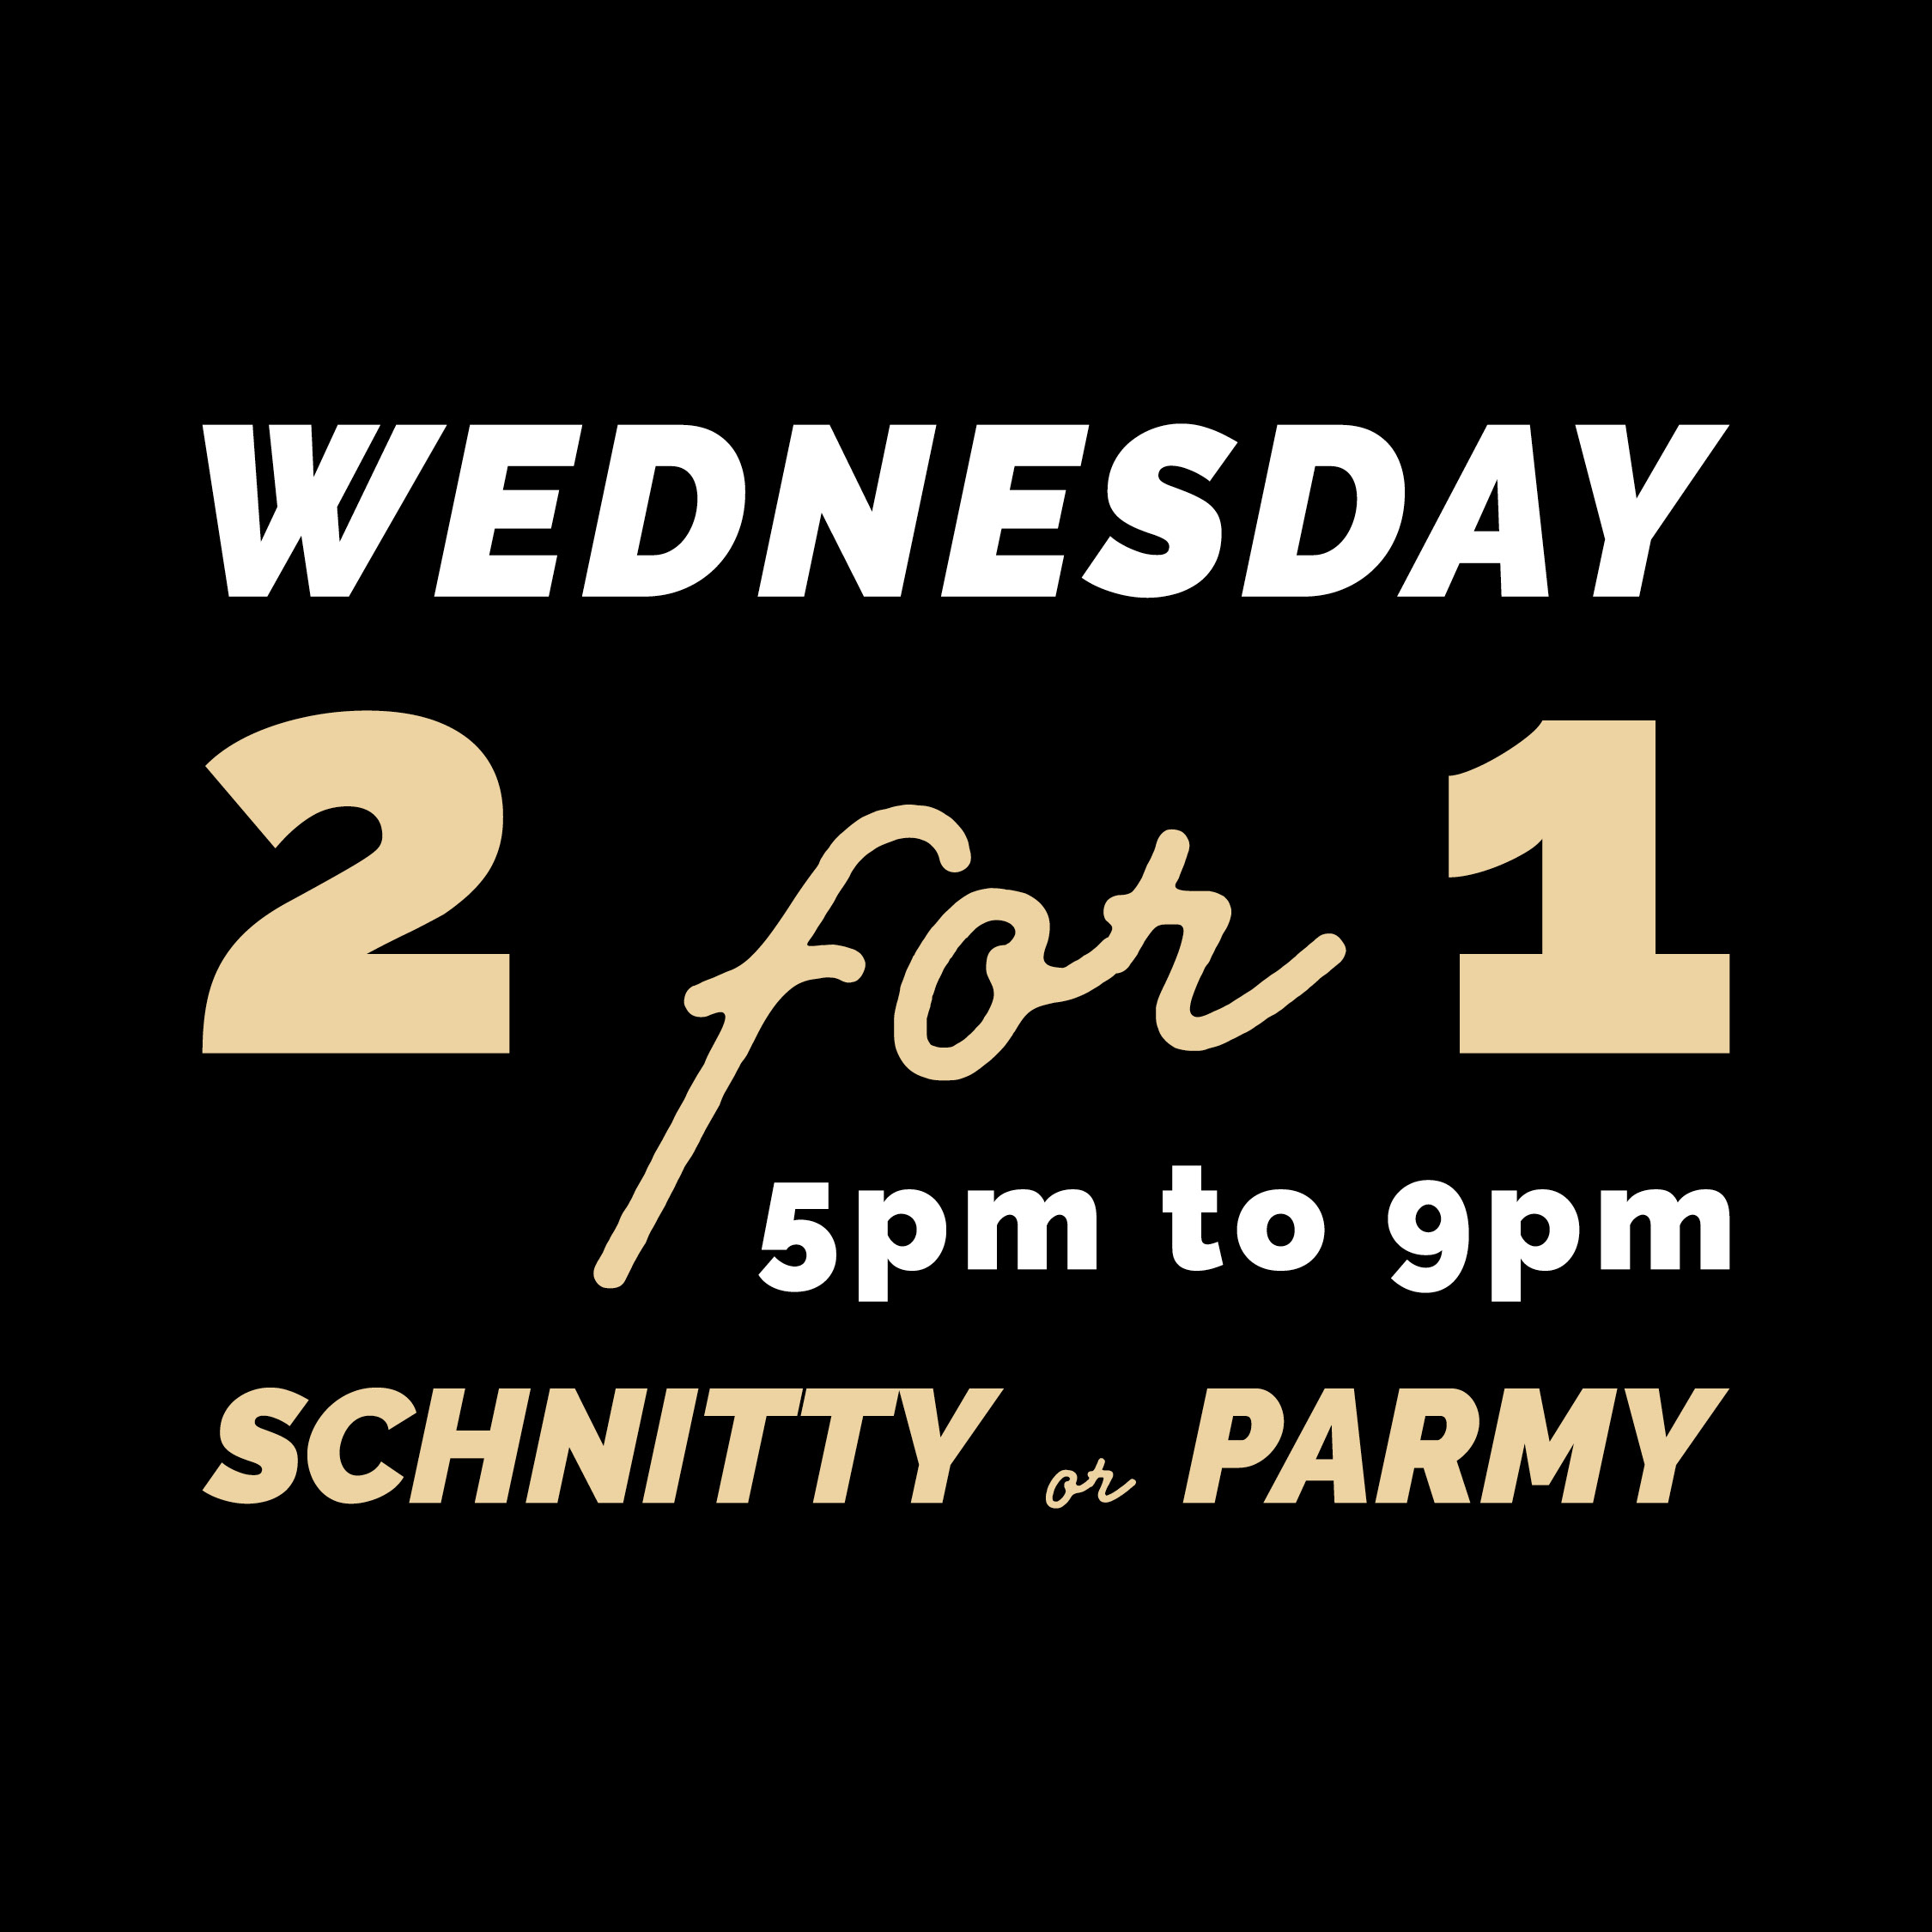 Wed 2 for 1